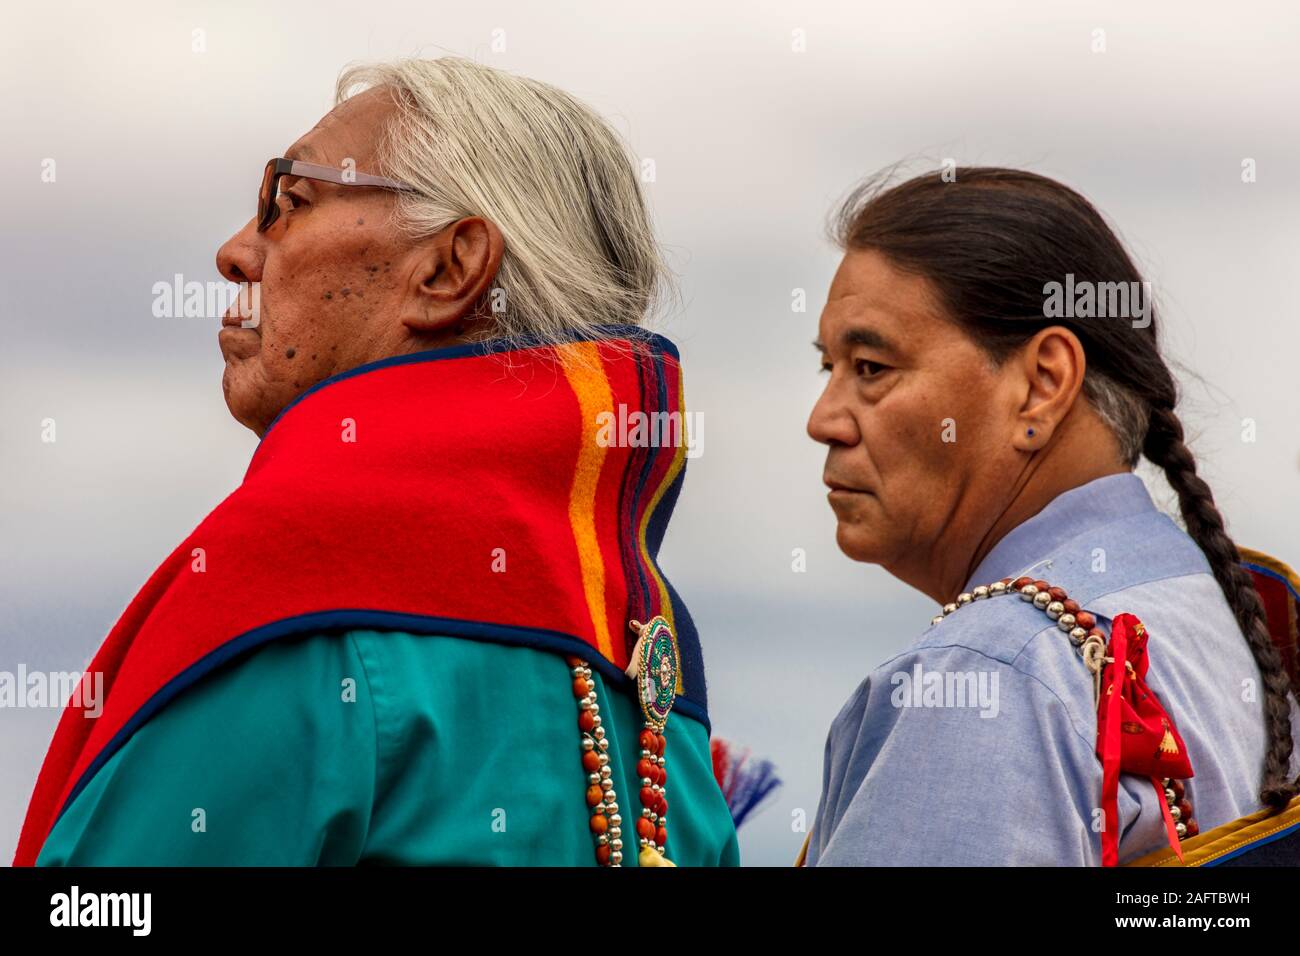 AUGUST 10, 2019 - GALLUP NEW MEXICO, USA - Portrait of Native American man at 98th Gallup Inter-tribal Indian Ceremonial, New Mexico Stock Photo